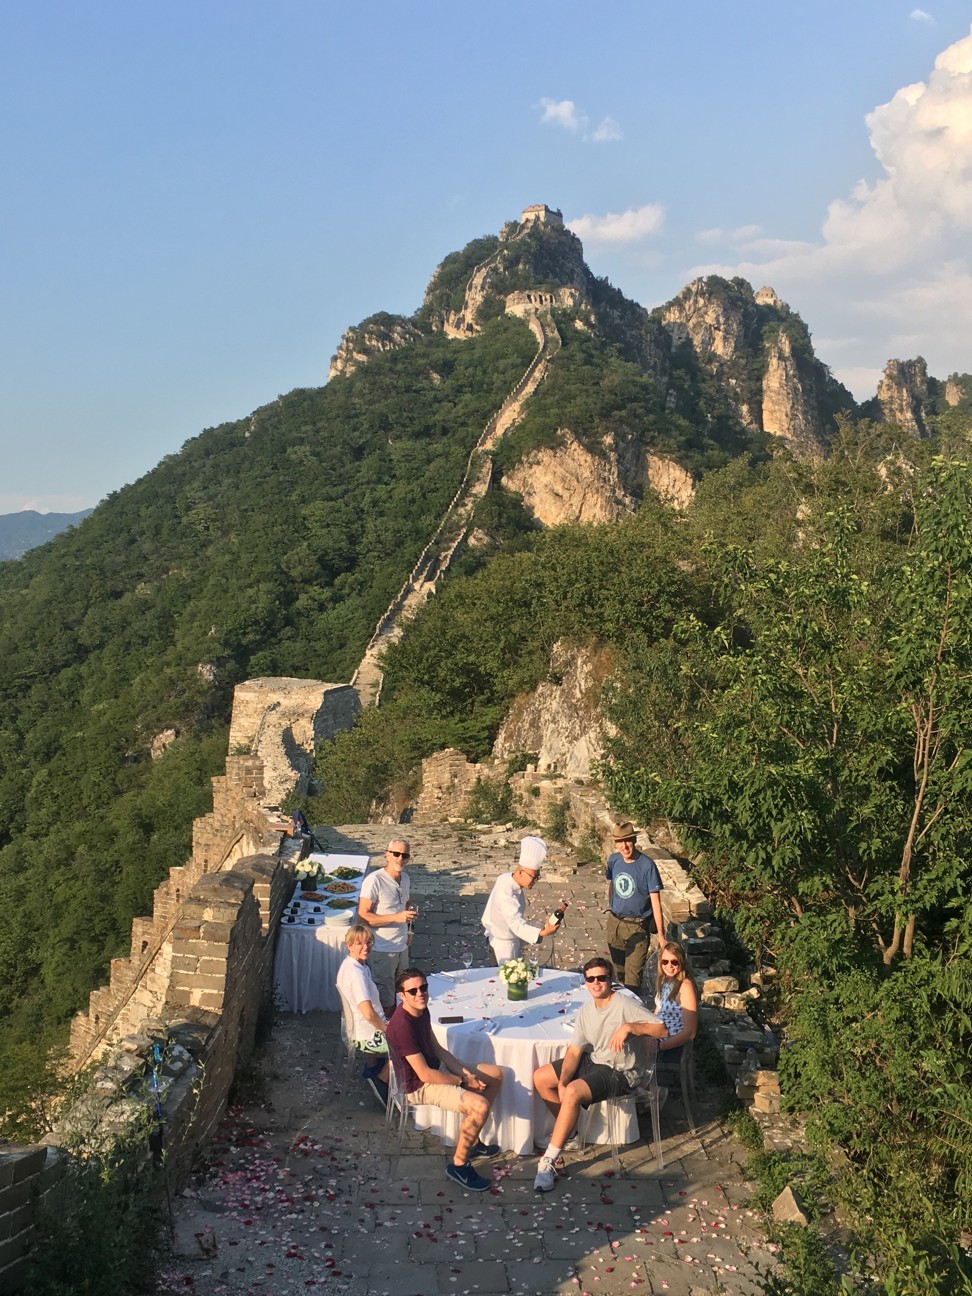 A private banquet on an unrestored section of the Great Wall is the sort of experience ultra-luxury tour companies in China can arrange for clients. Photo: Cerian Foulkes